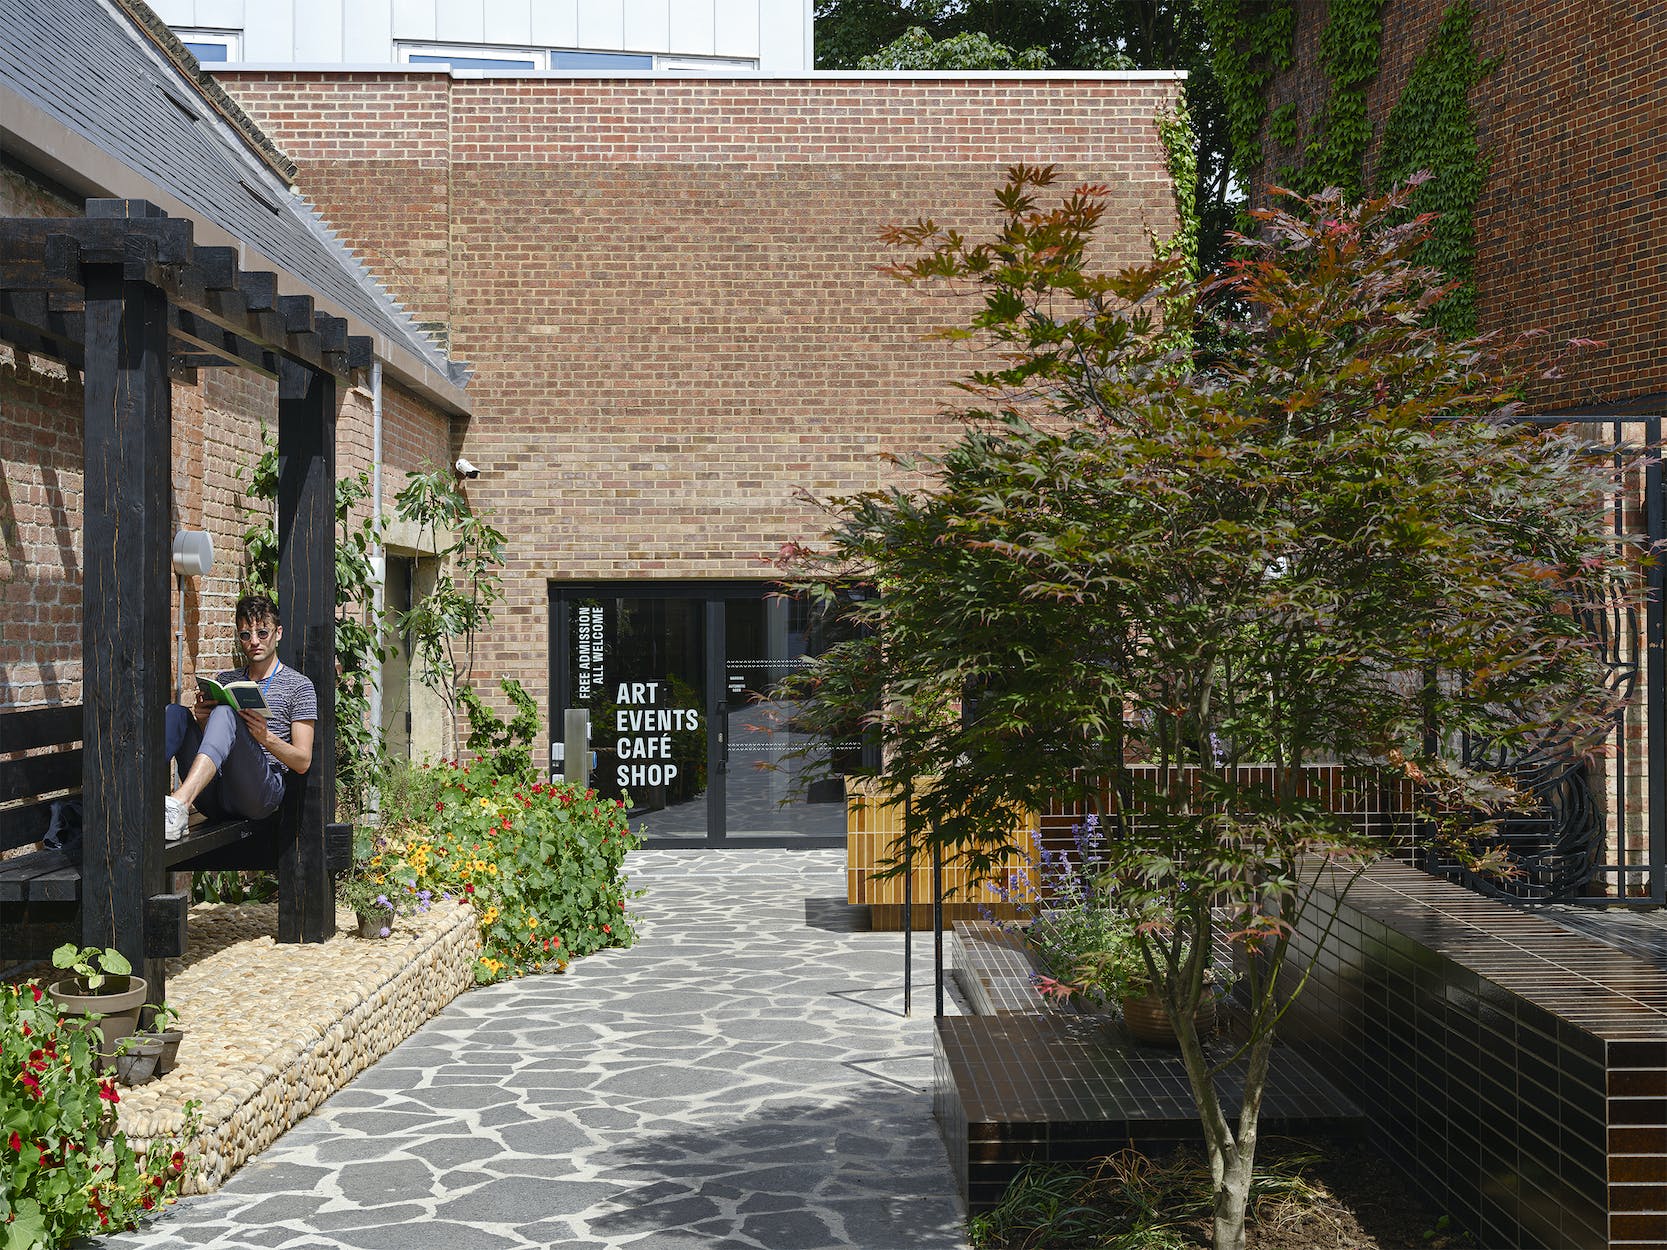 A photograph of the garden and entrance at Studio Voltaire. Grey slabs lead to the entrance doors of the bricked building. An acer tree stands on the right in front of brown tiles that make up steps and seating. On the left a man sits on a wooden pergola on a raised pebbled platform.